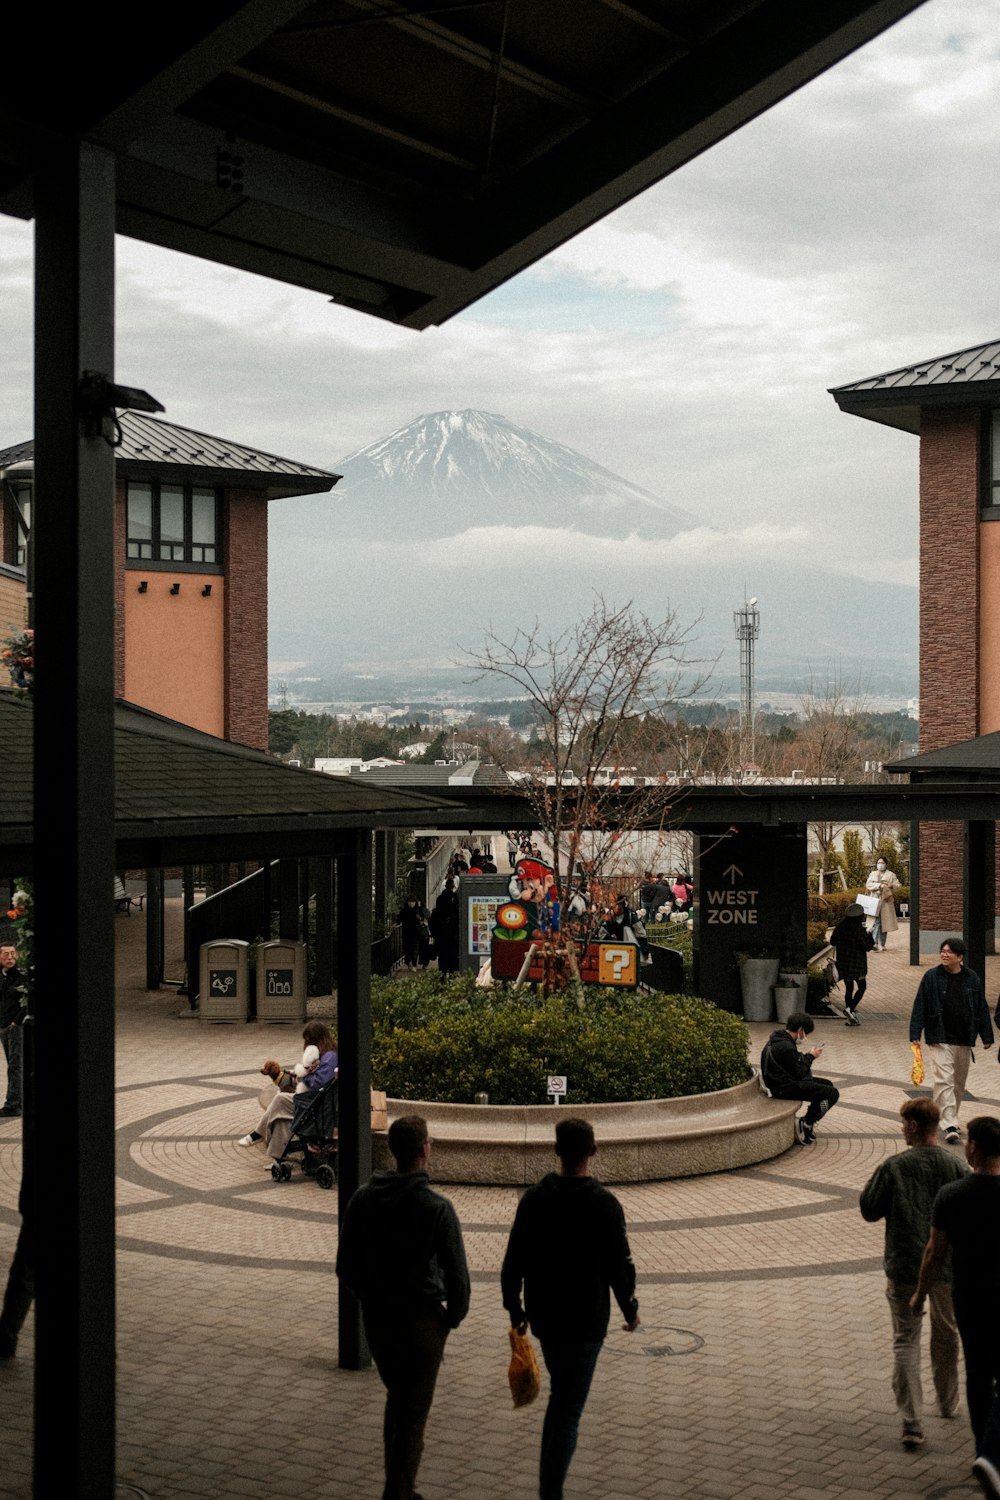 a group of people walking around a courtyard with a mountain in the background